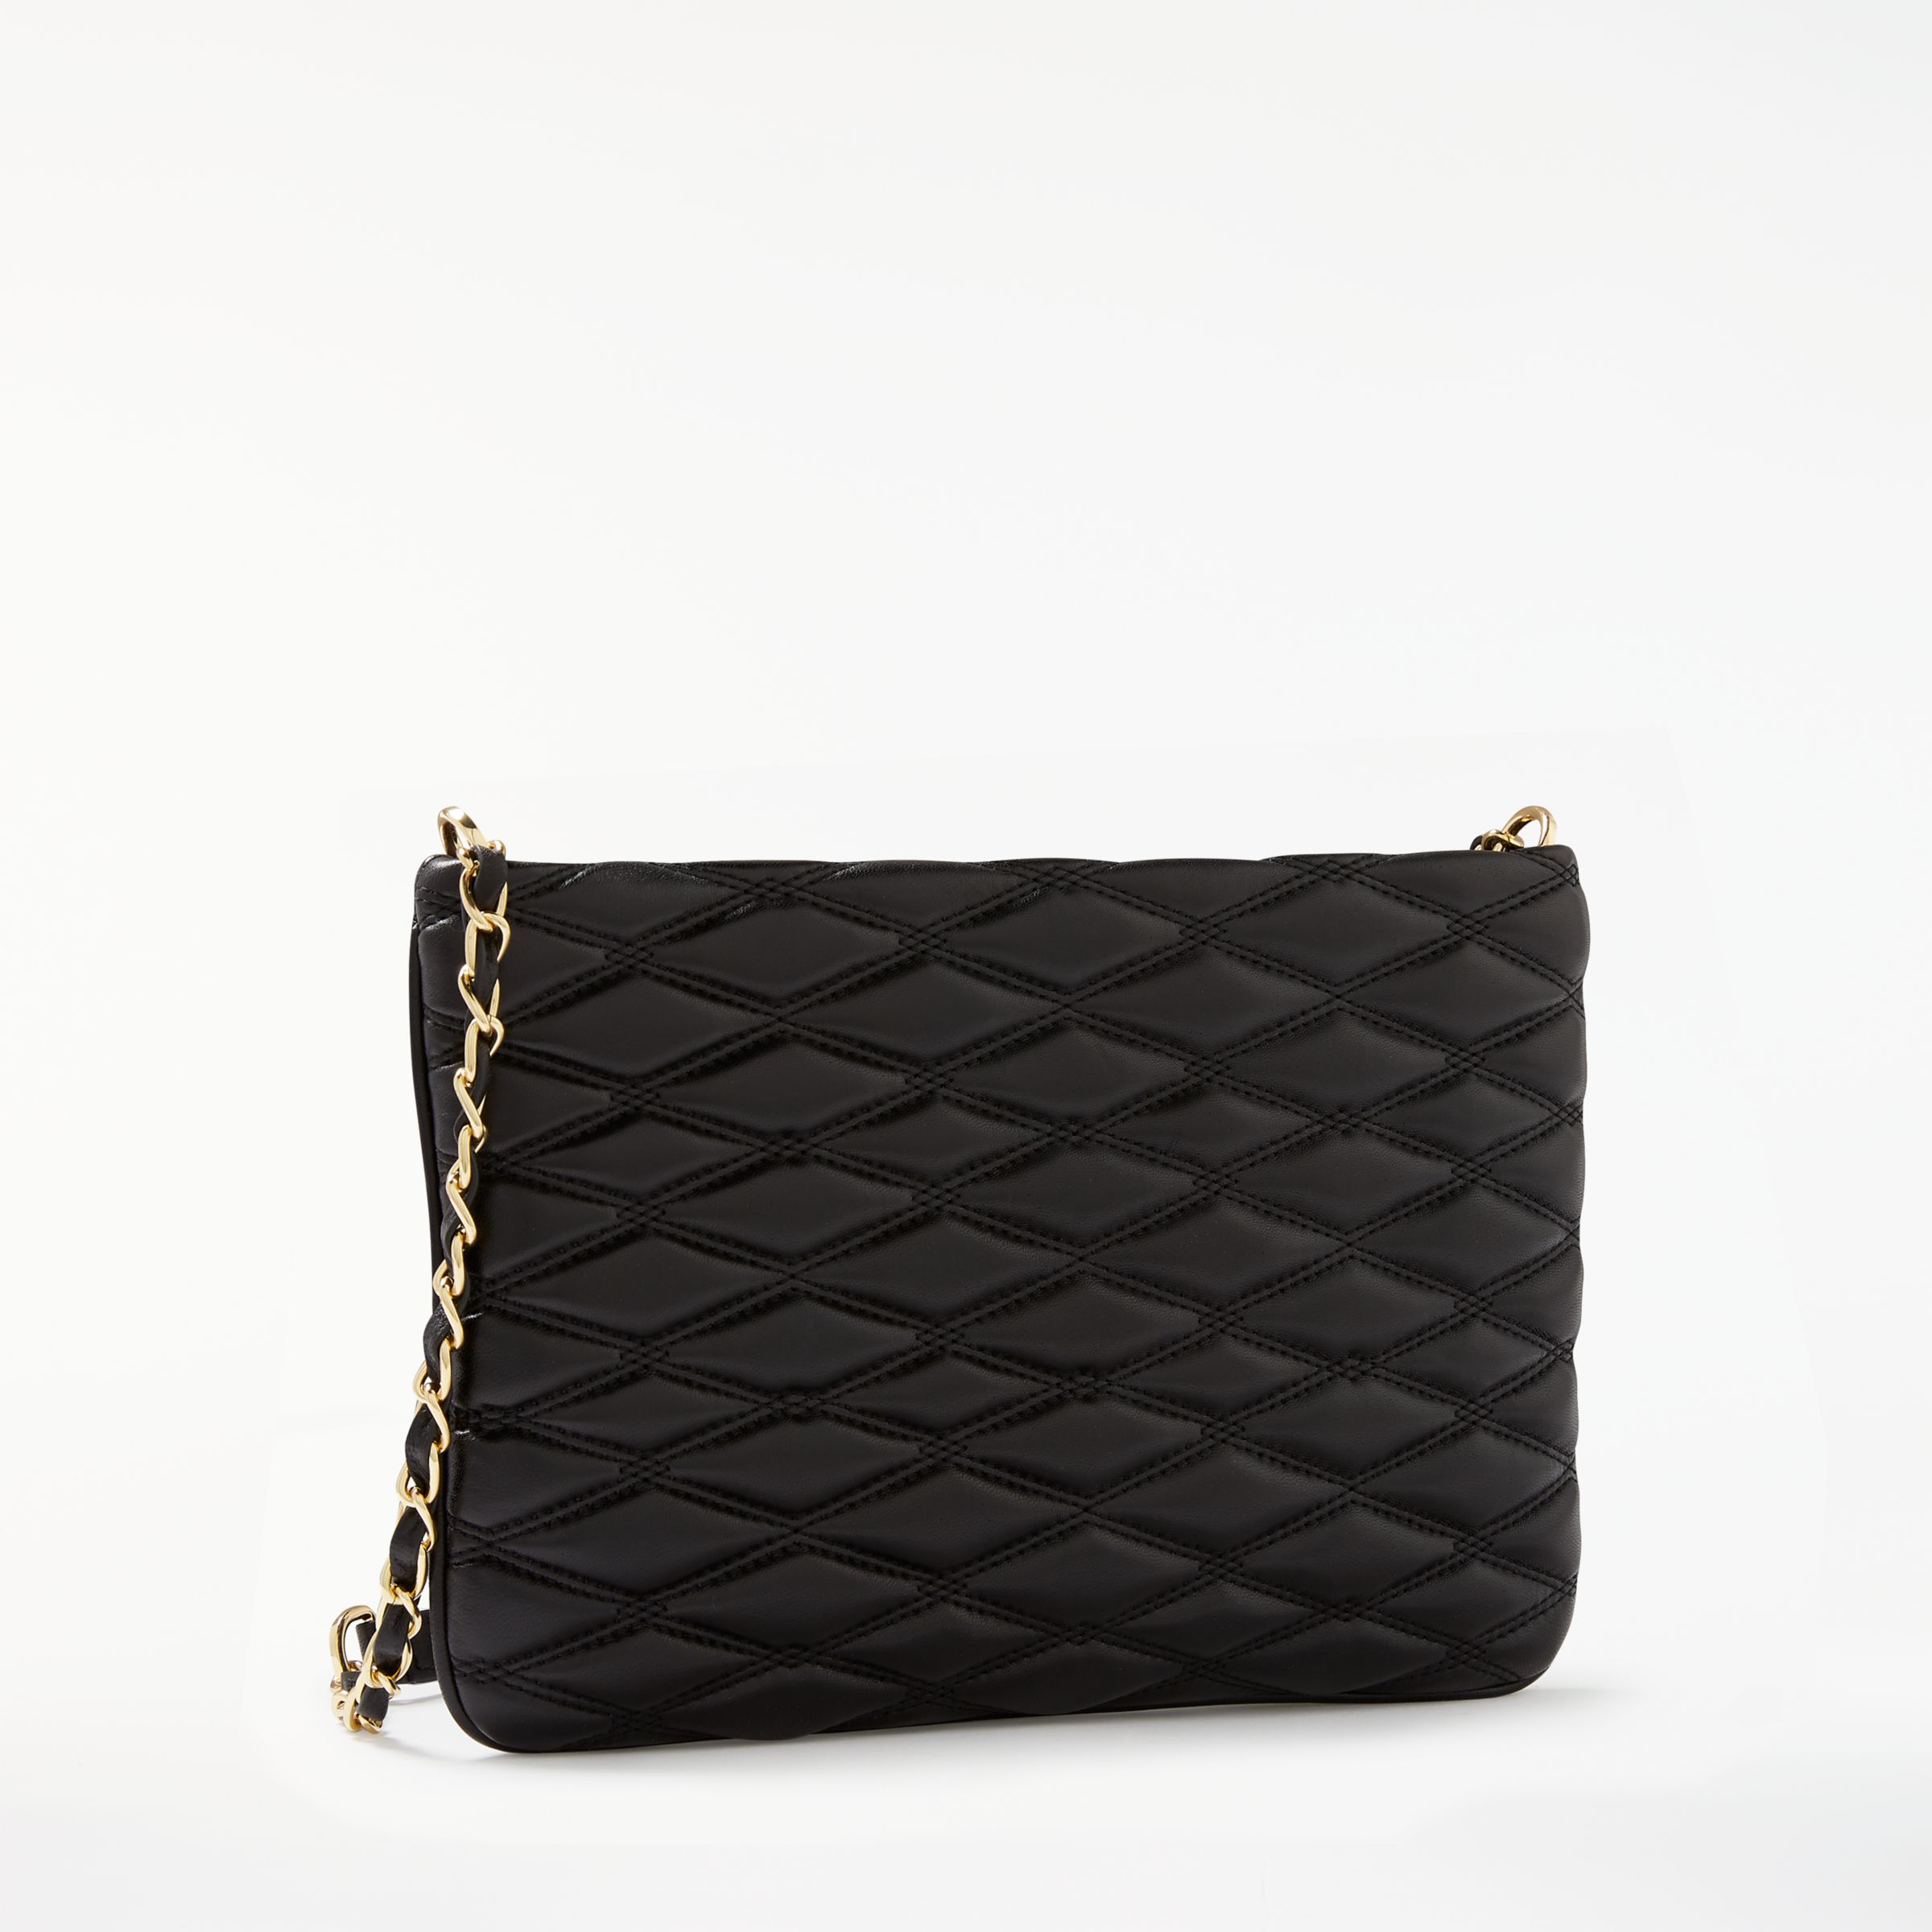 DKNY Nappa Leather Quilted Cross Body Bag, Black